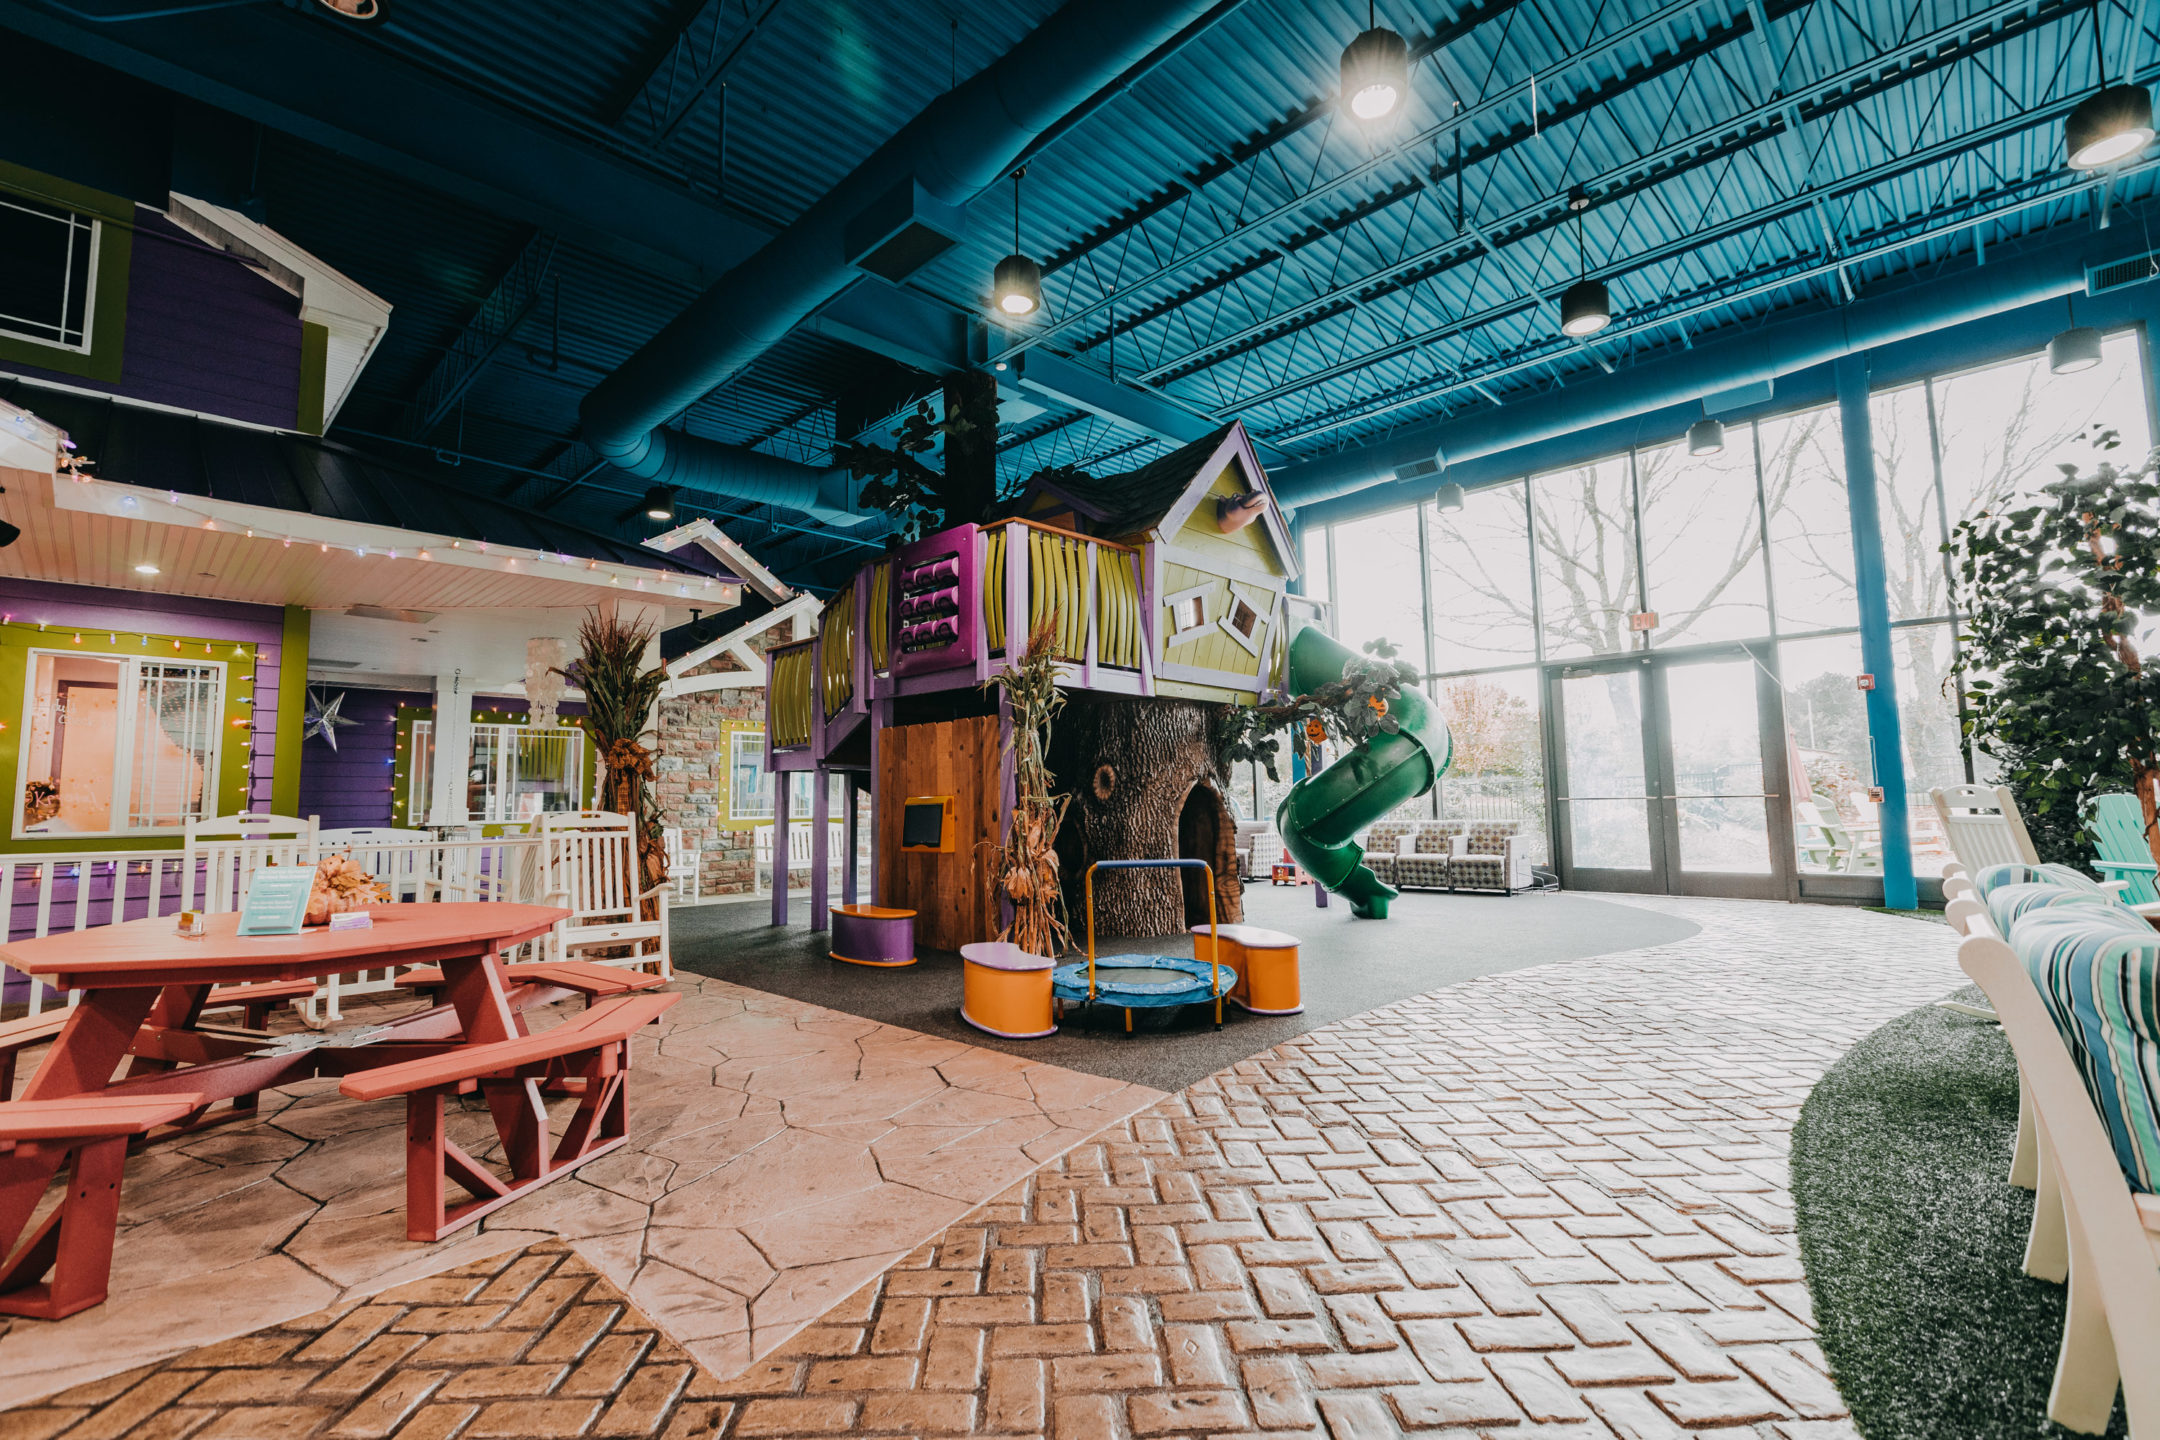 A children’s play structure is situated inside a welcoming, large pediatric dental office. 